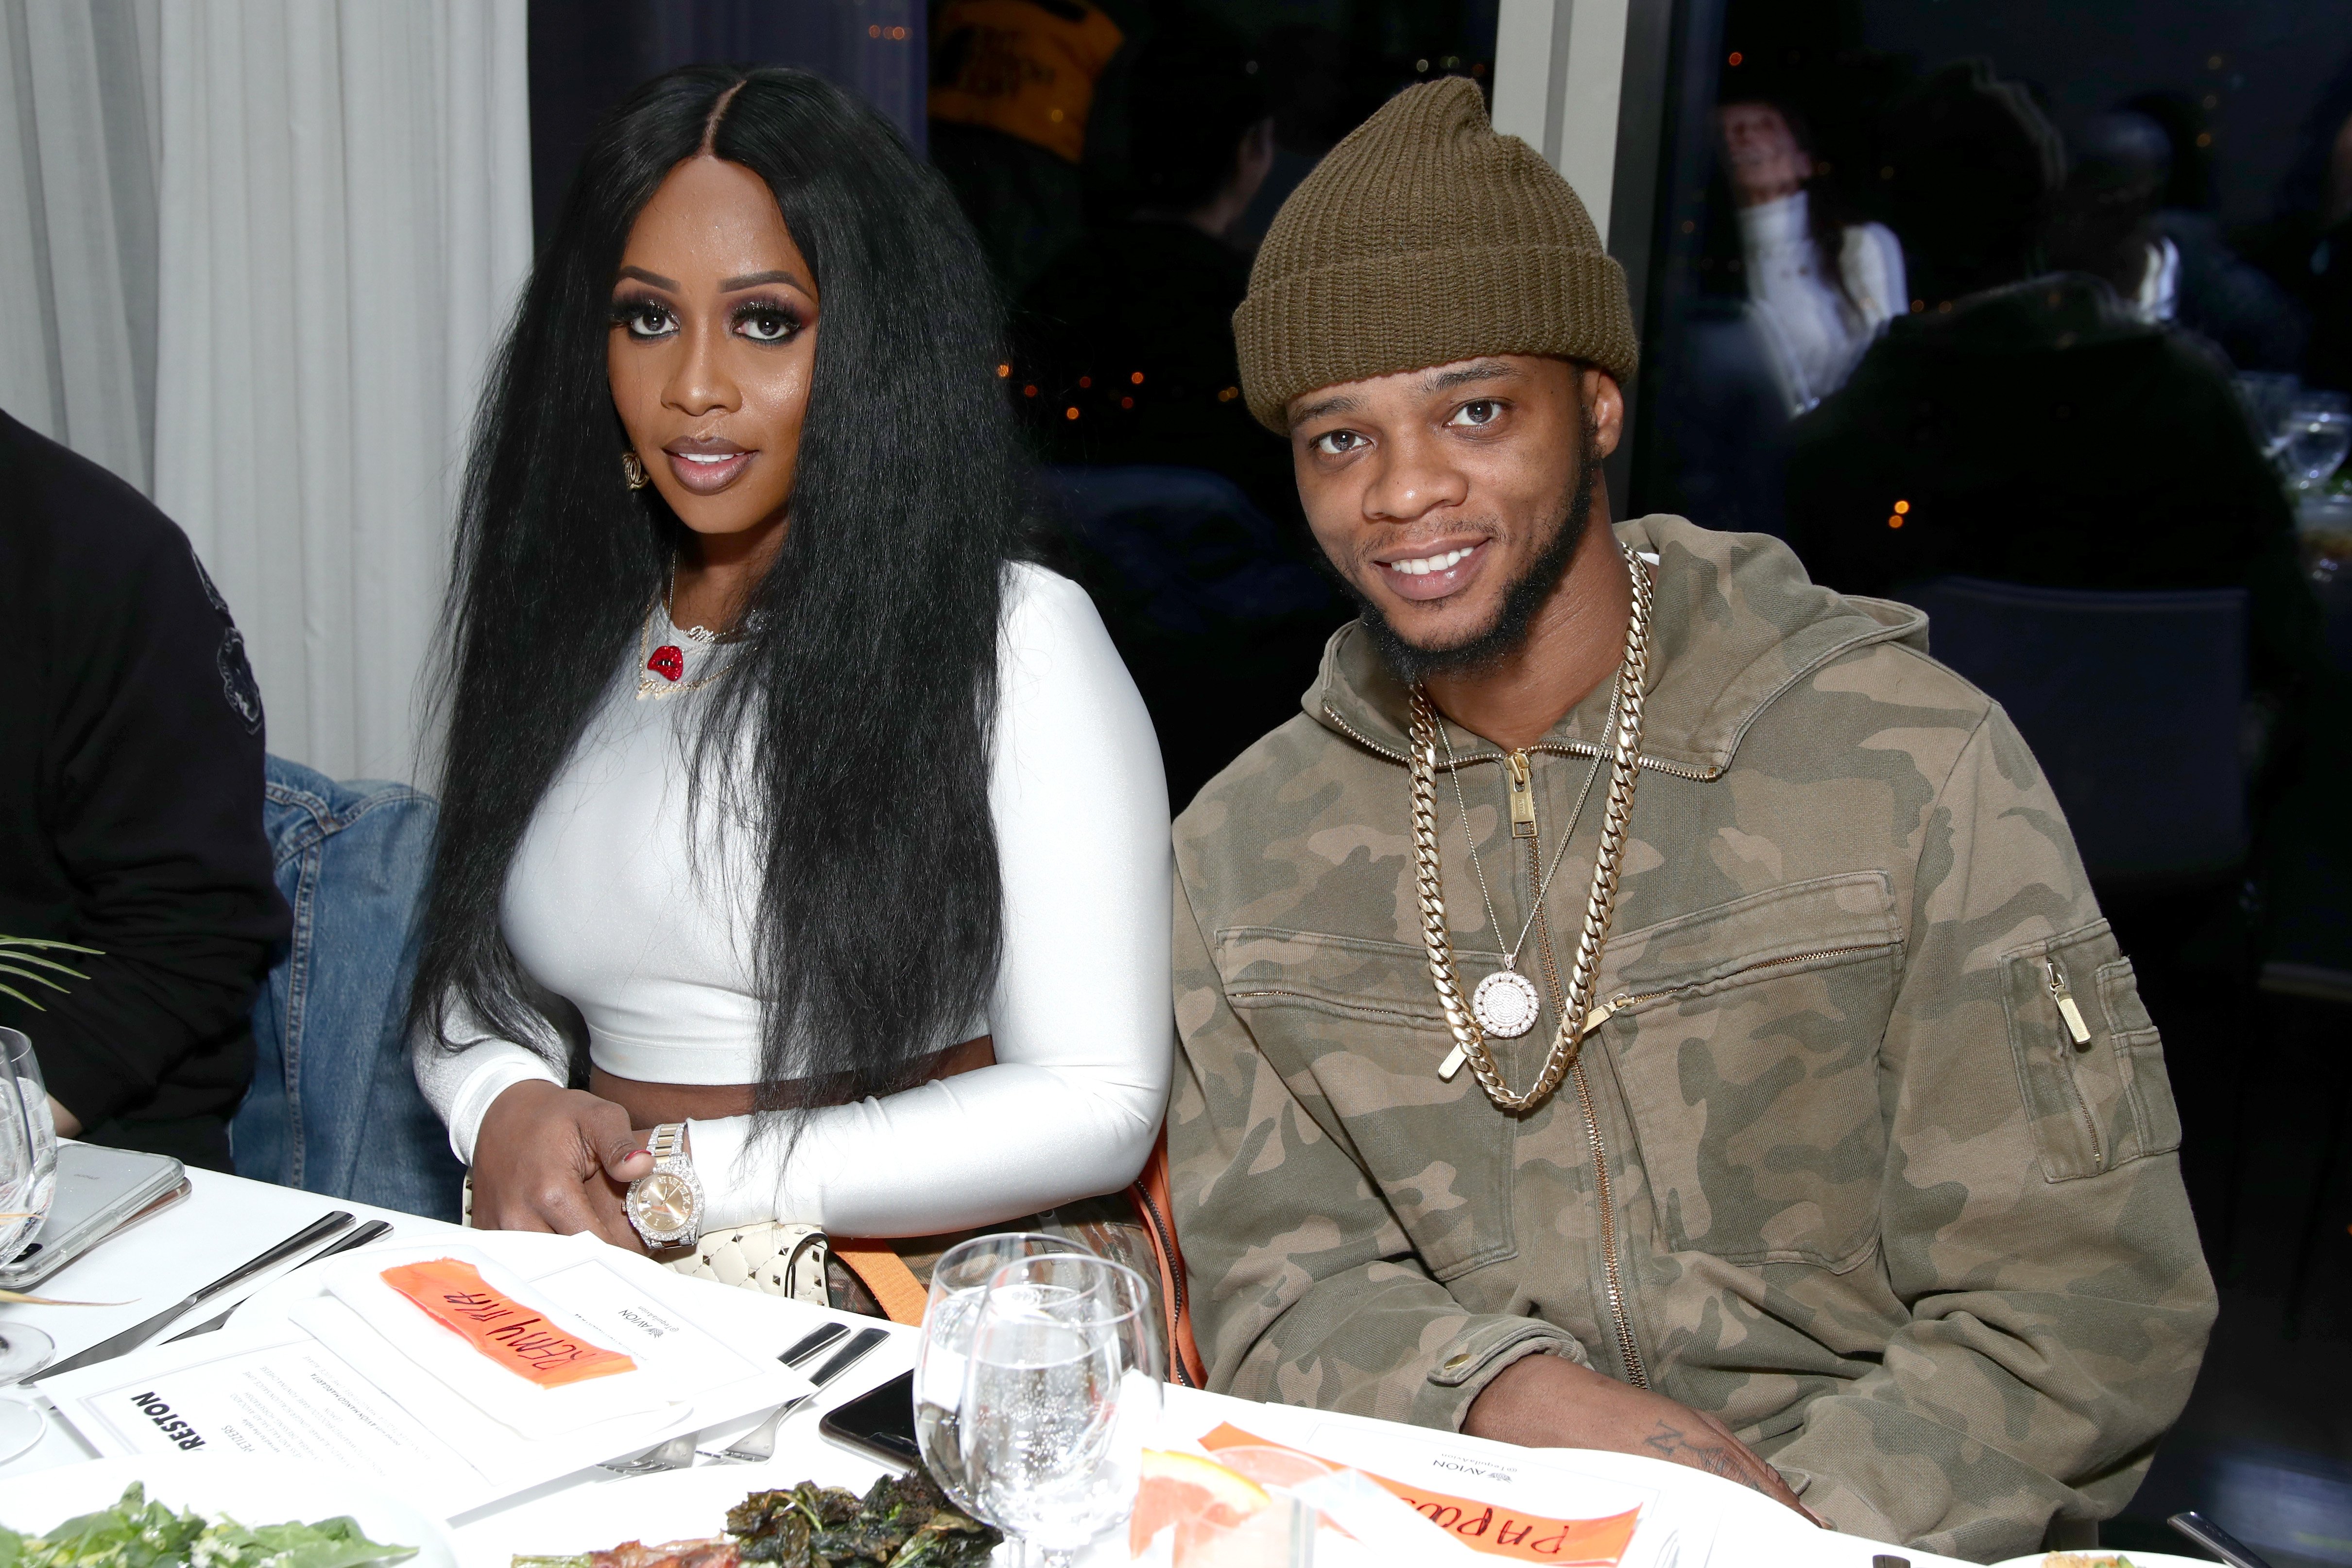 Remy Ma and Papoose Mackie attend the Heron Preston + Tequila Avion Dance Party on February 13, 2018. | Photo: Getty Images